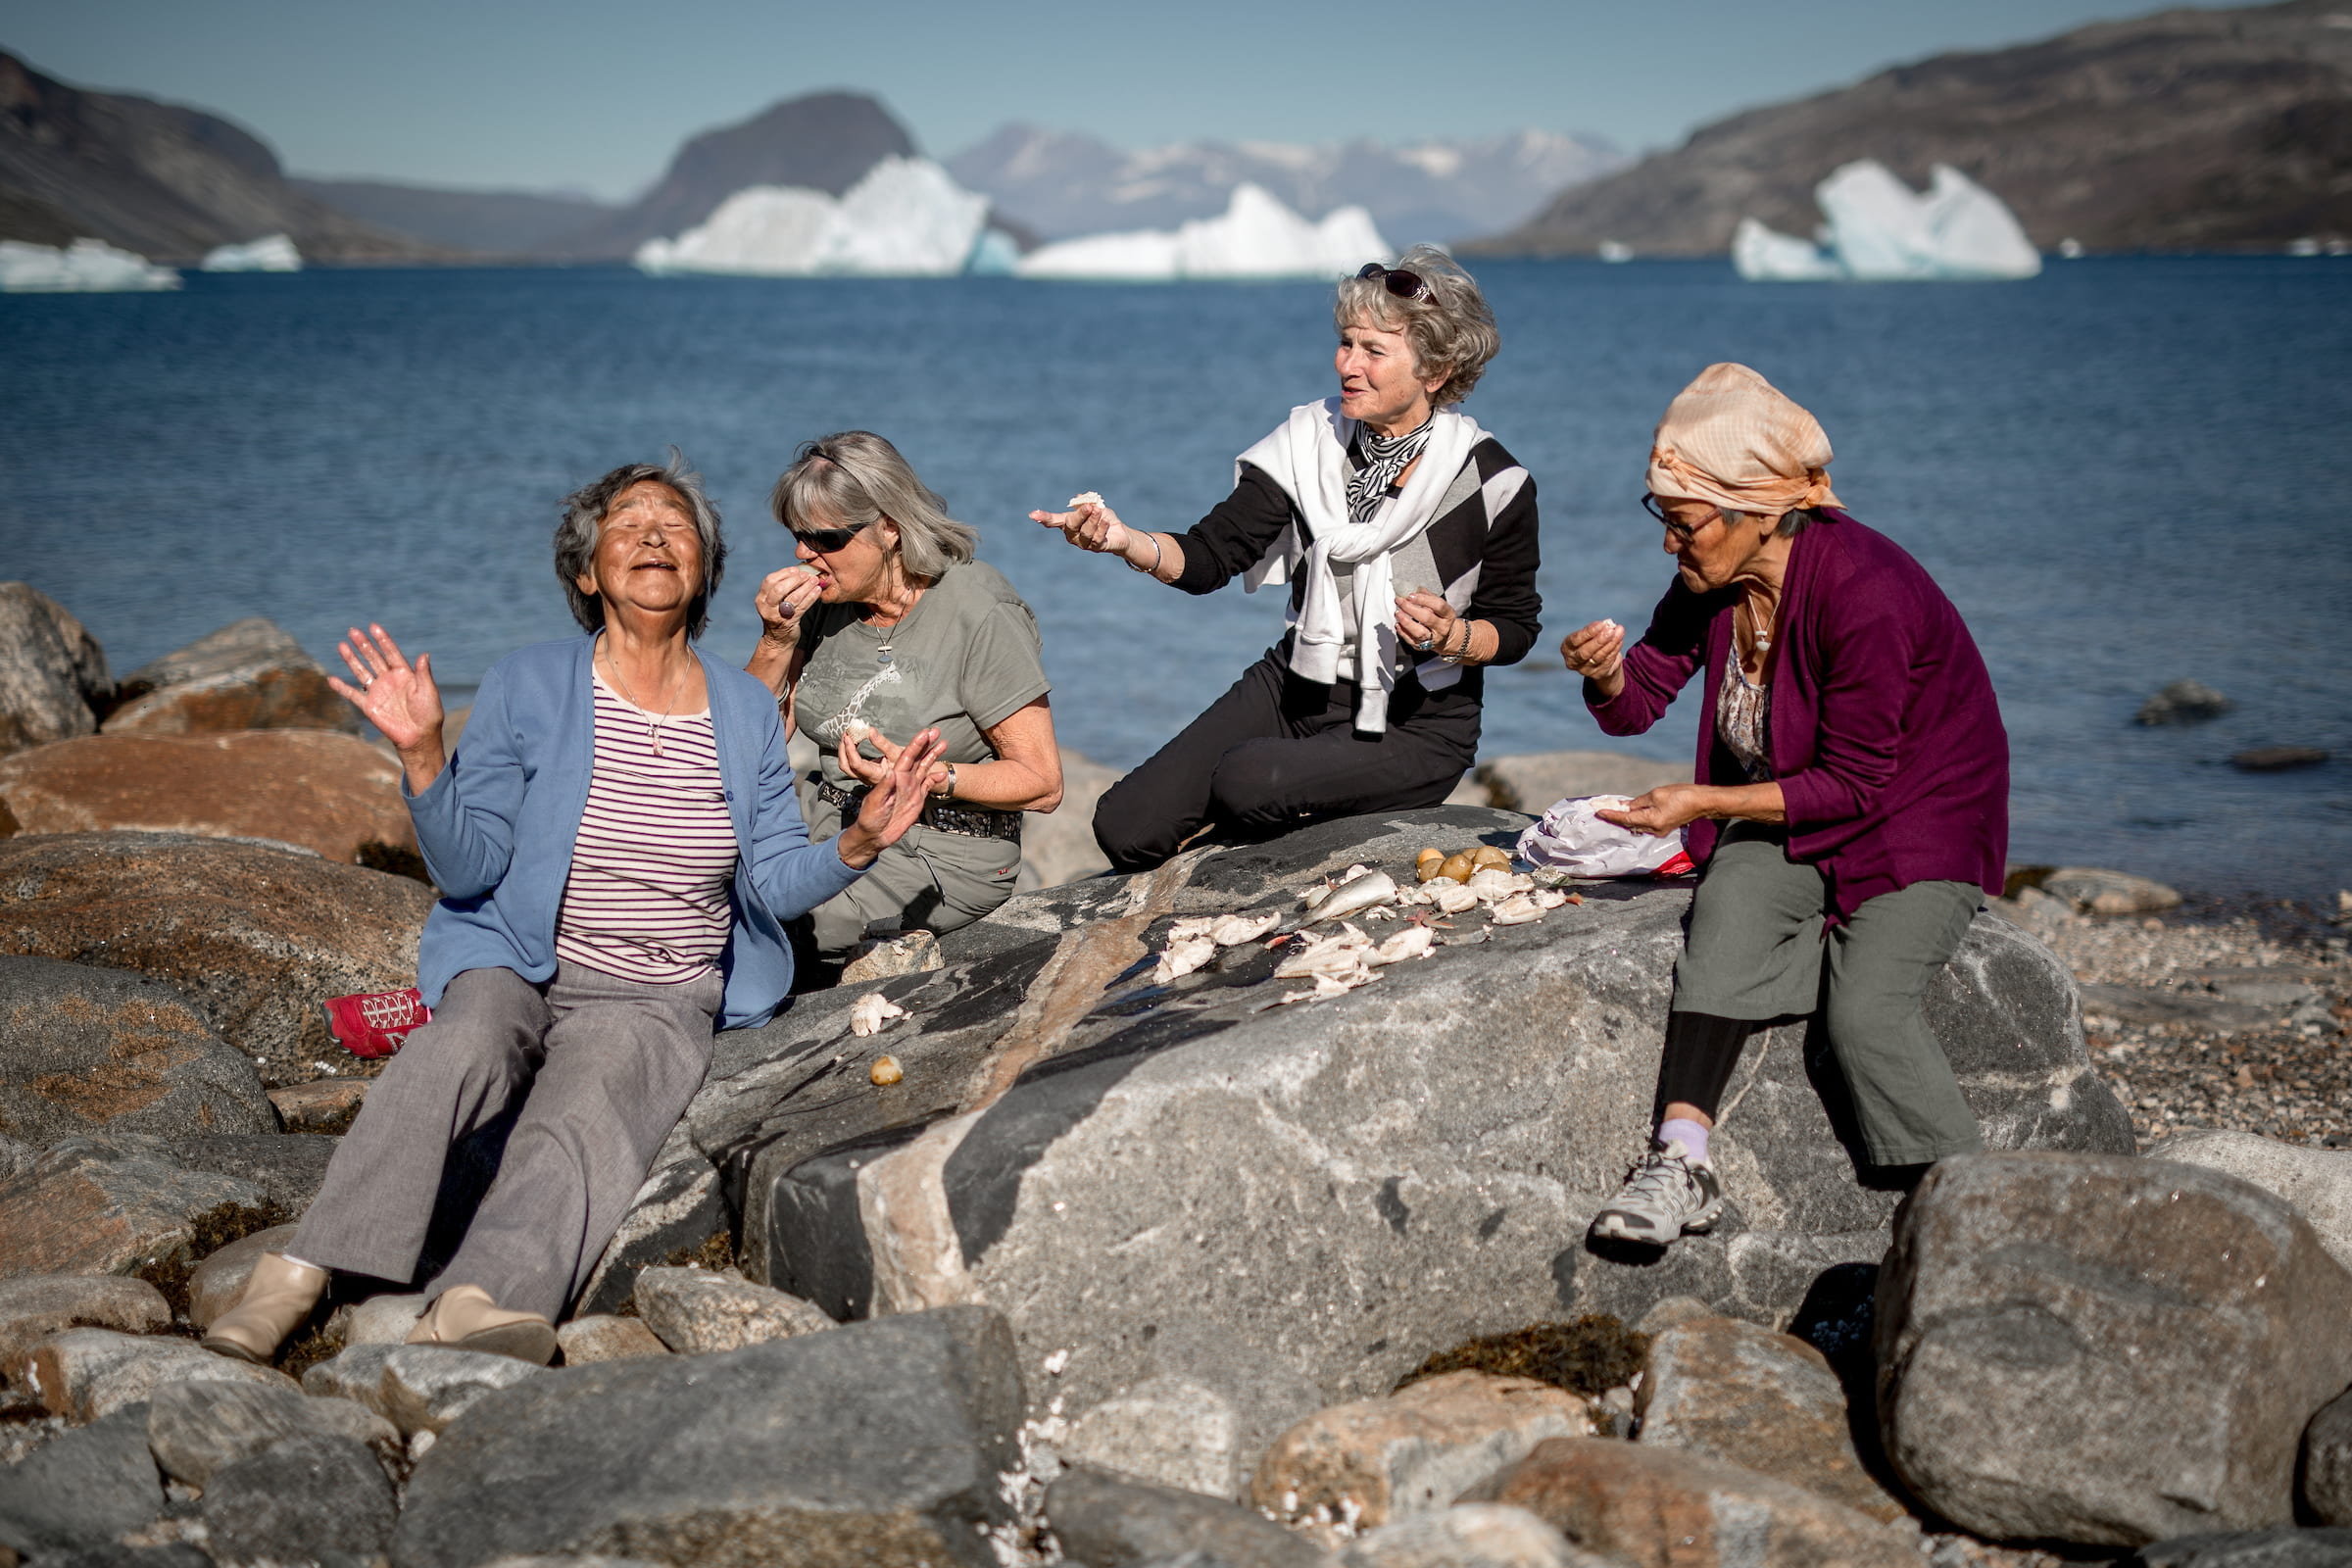 Four women sharing fun stories at an outdoor meal in Narsaq in South Greenland. By Mads Pihl